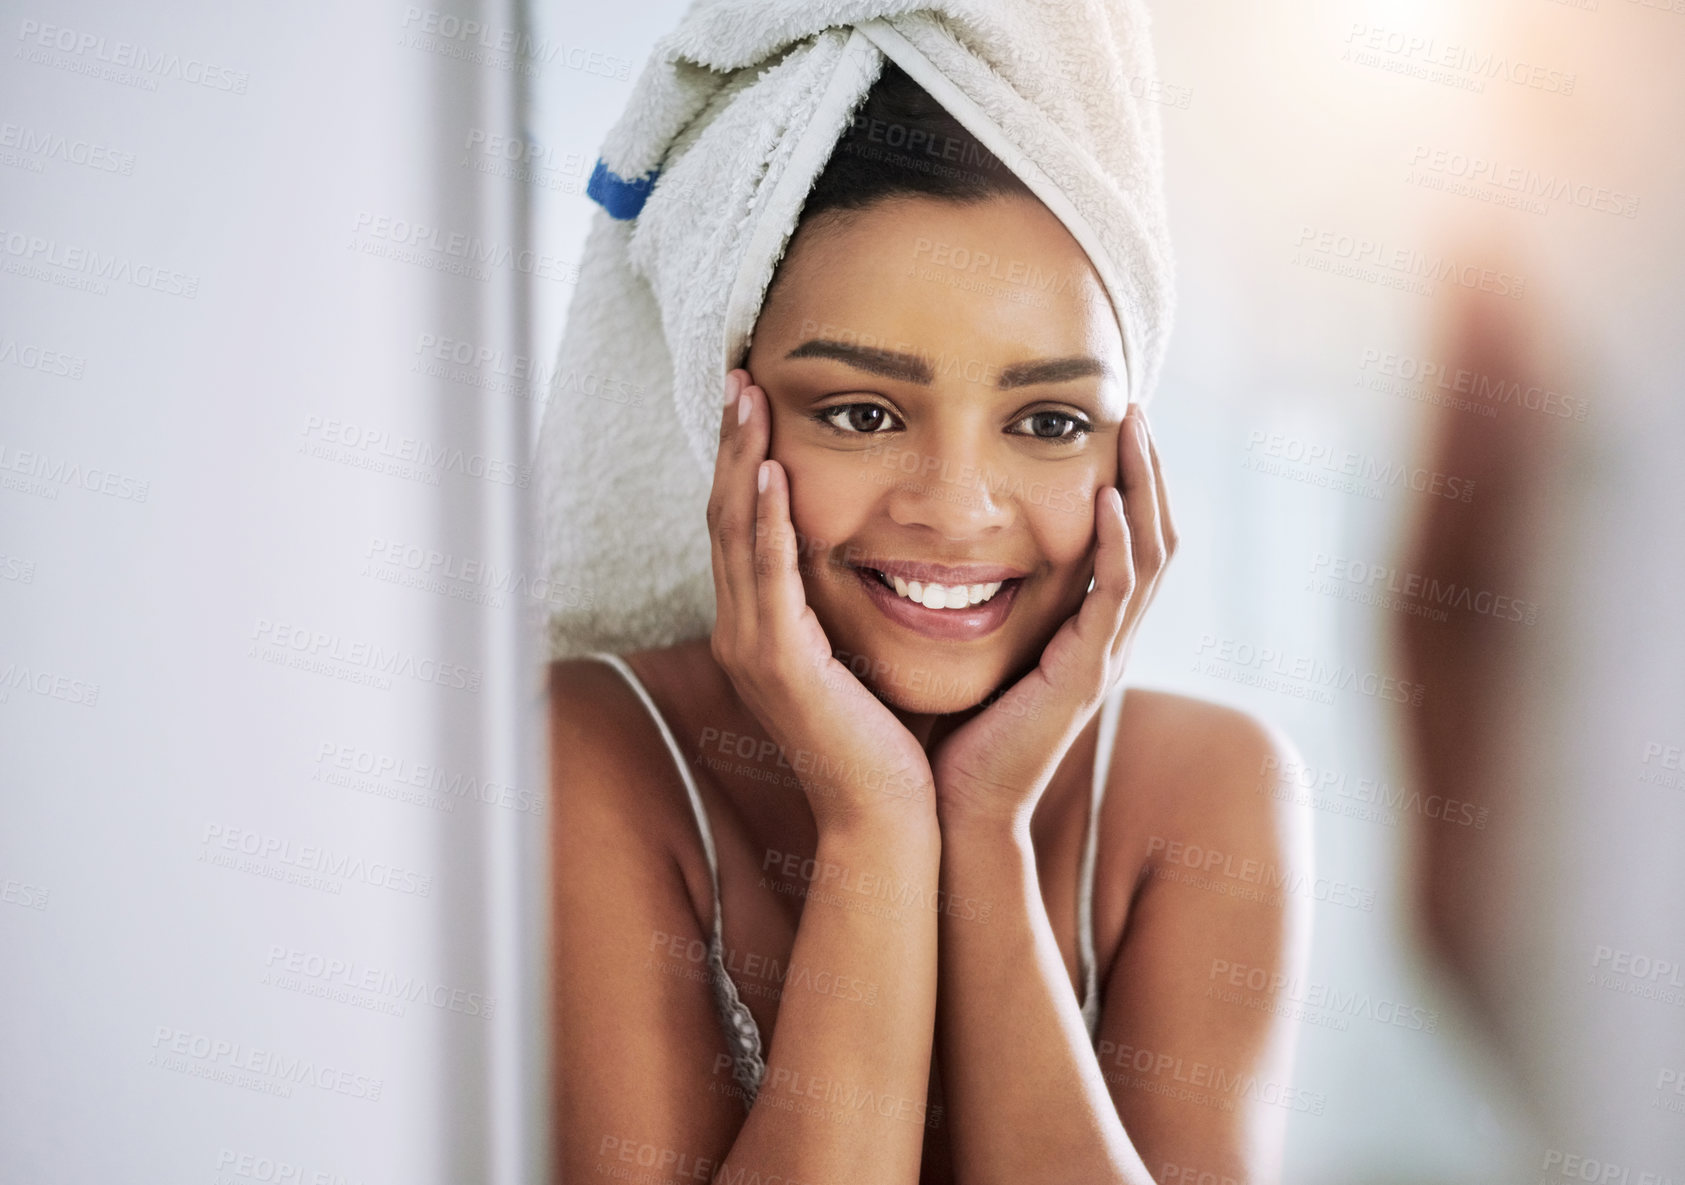 Buy stock photo Shot of an attractive young woman looking at her face in the bathroom mirror